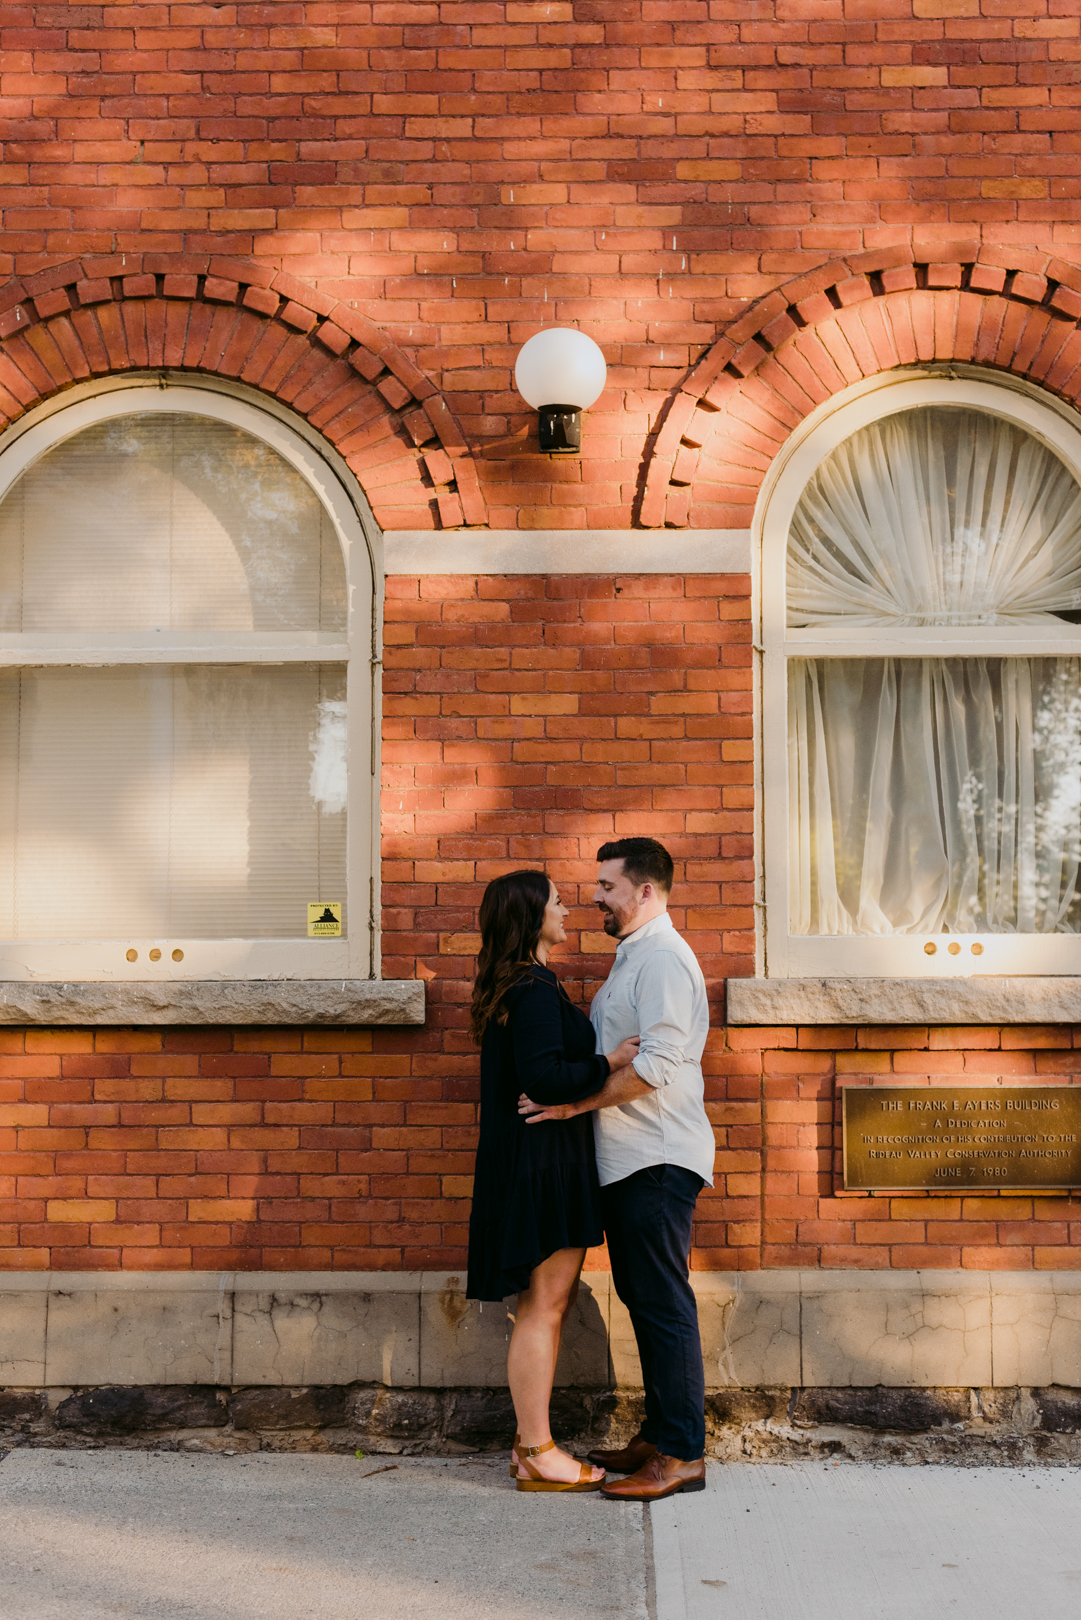 engaged couple cuddling in front of old red brick building and window panes